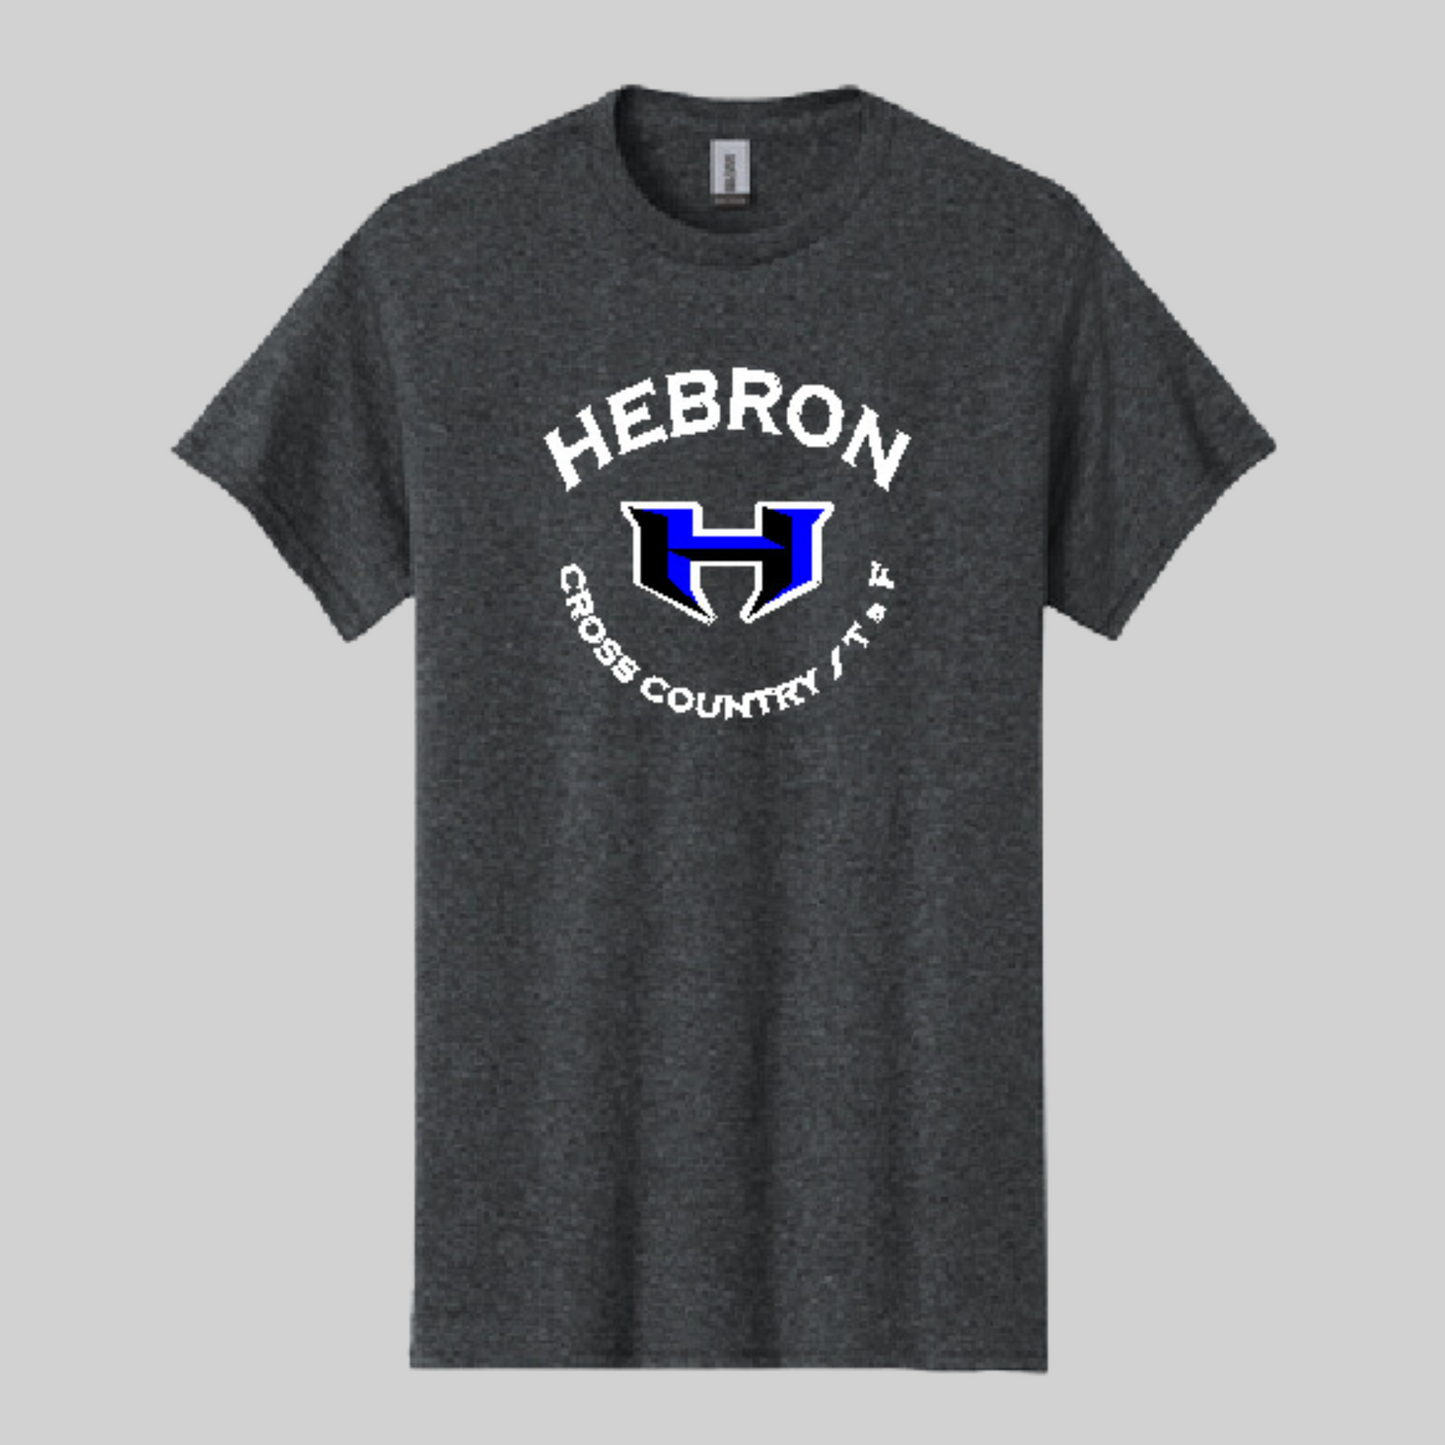 Hebron High School Cross Country/ Track and Field 23-2